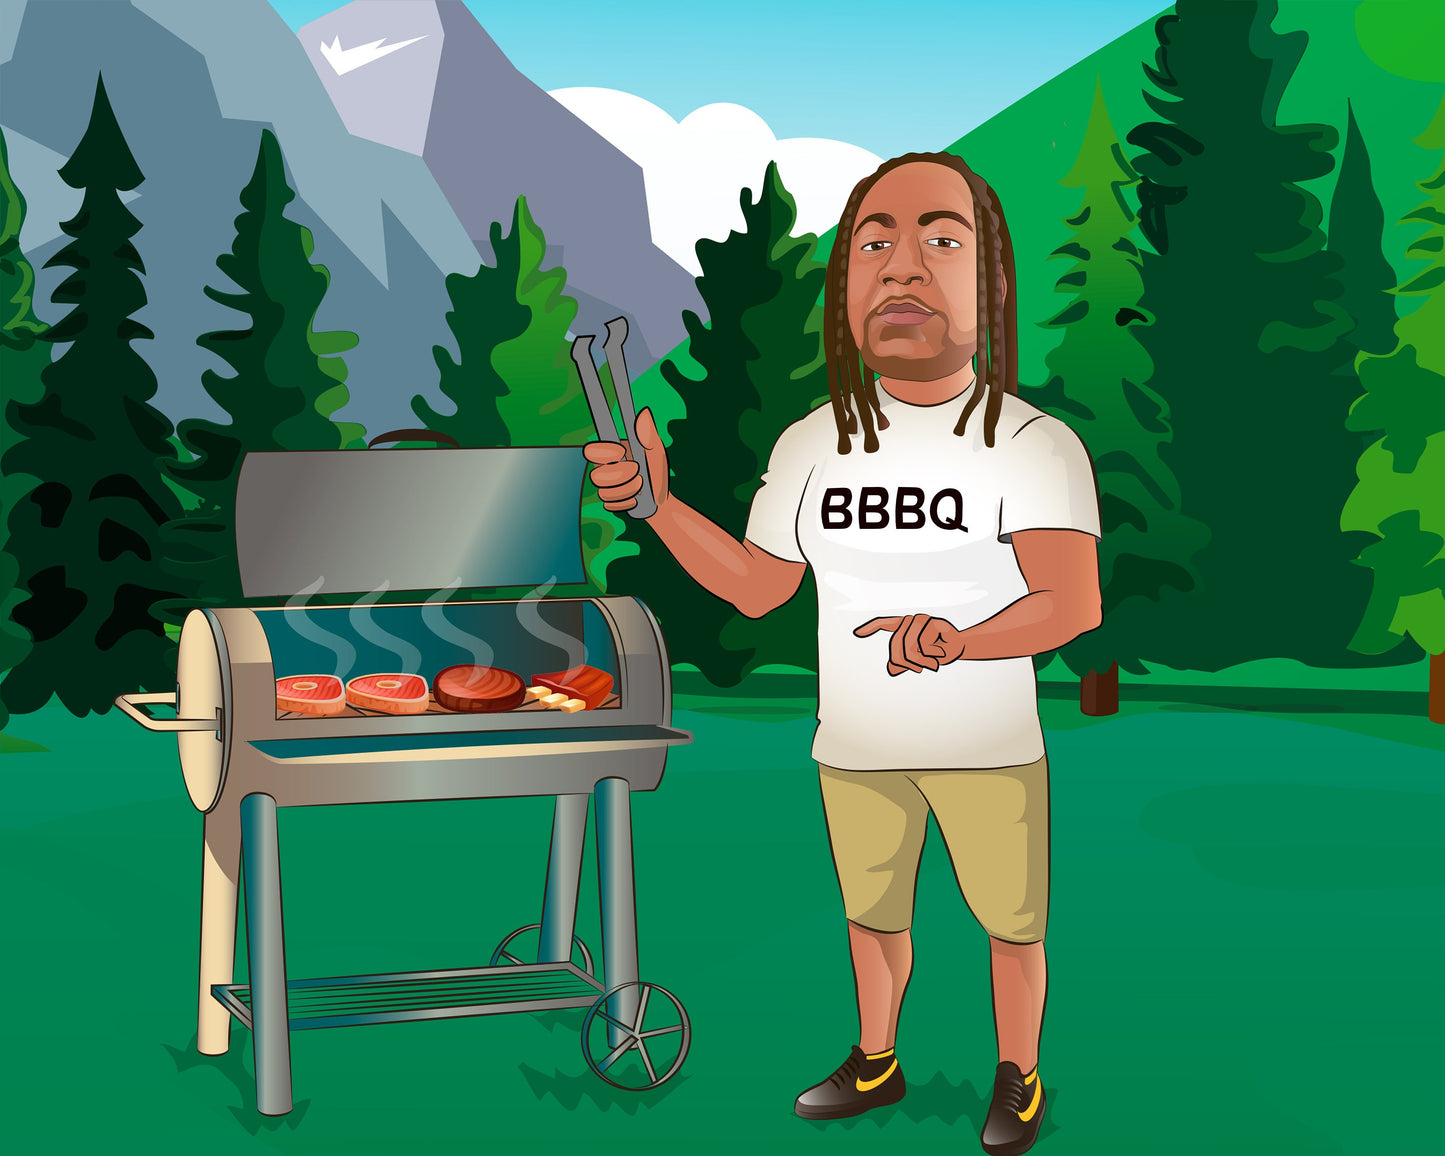 Grill Lover Gift - Custom Caricature Portrait From Your Photo